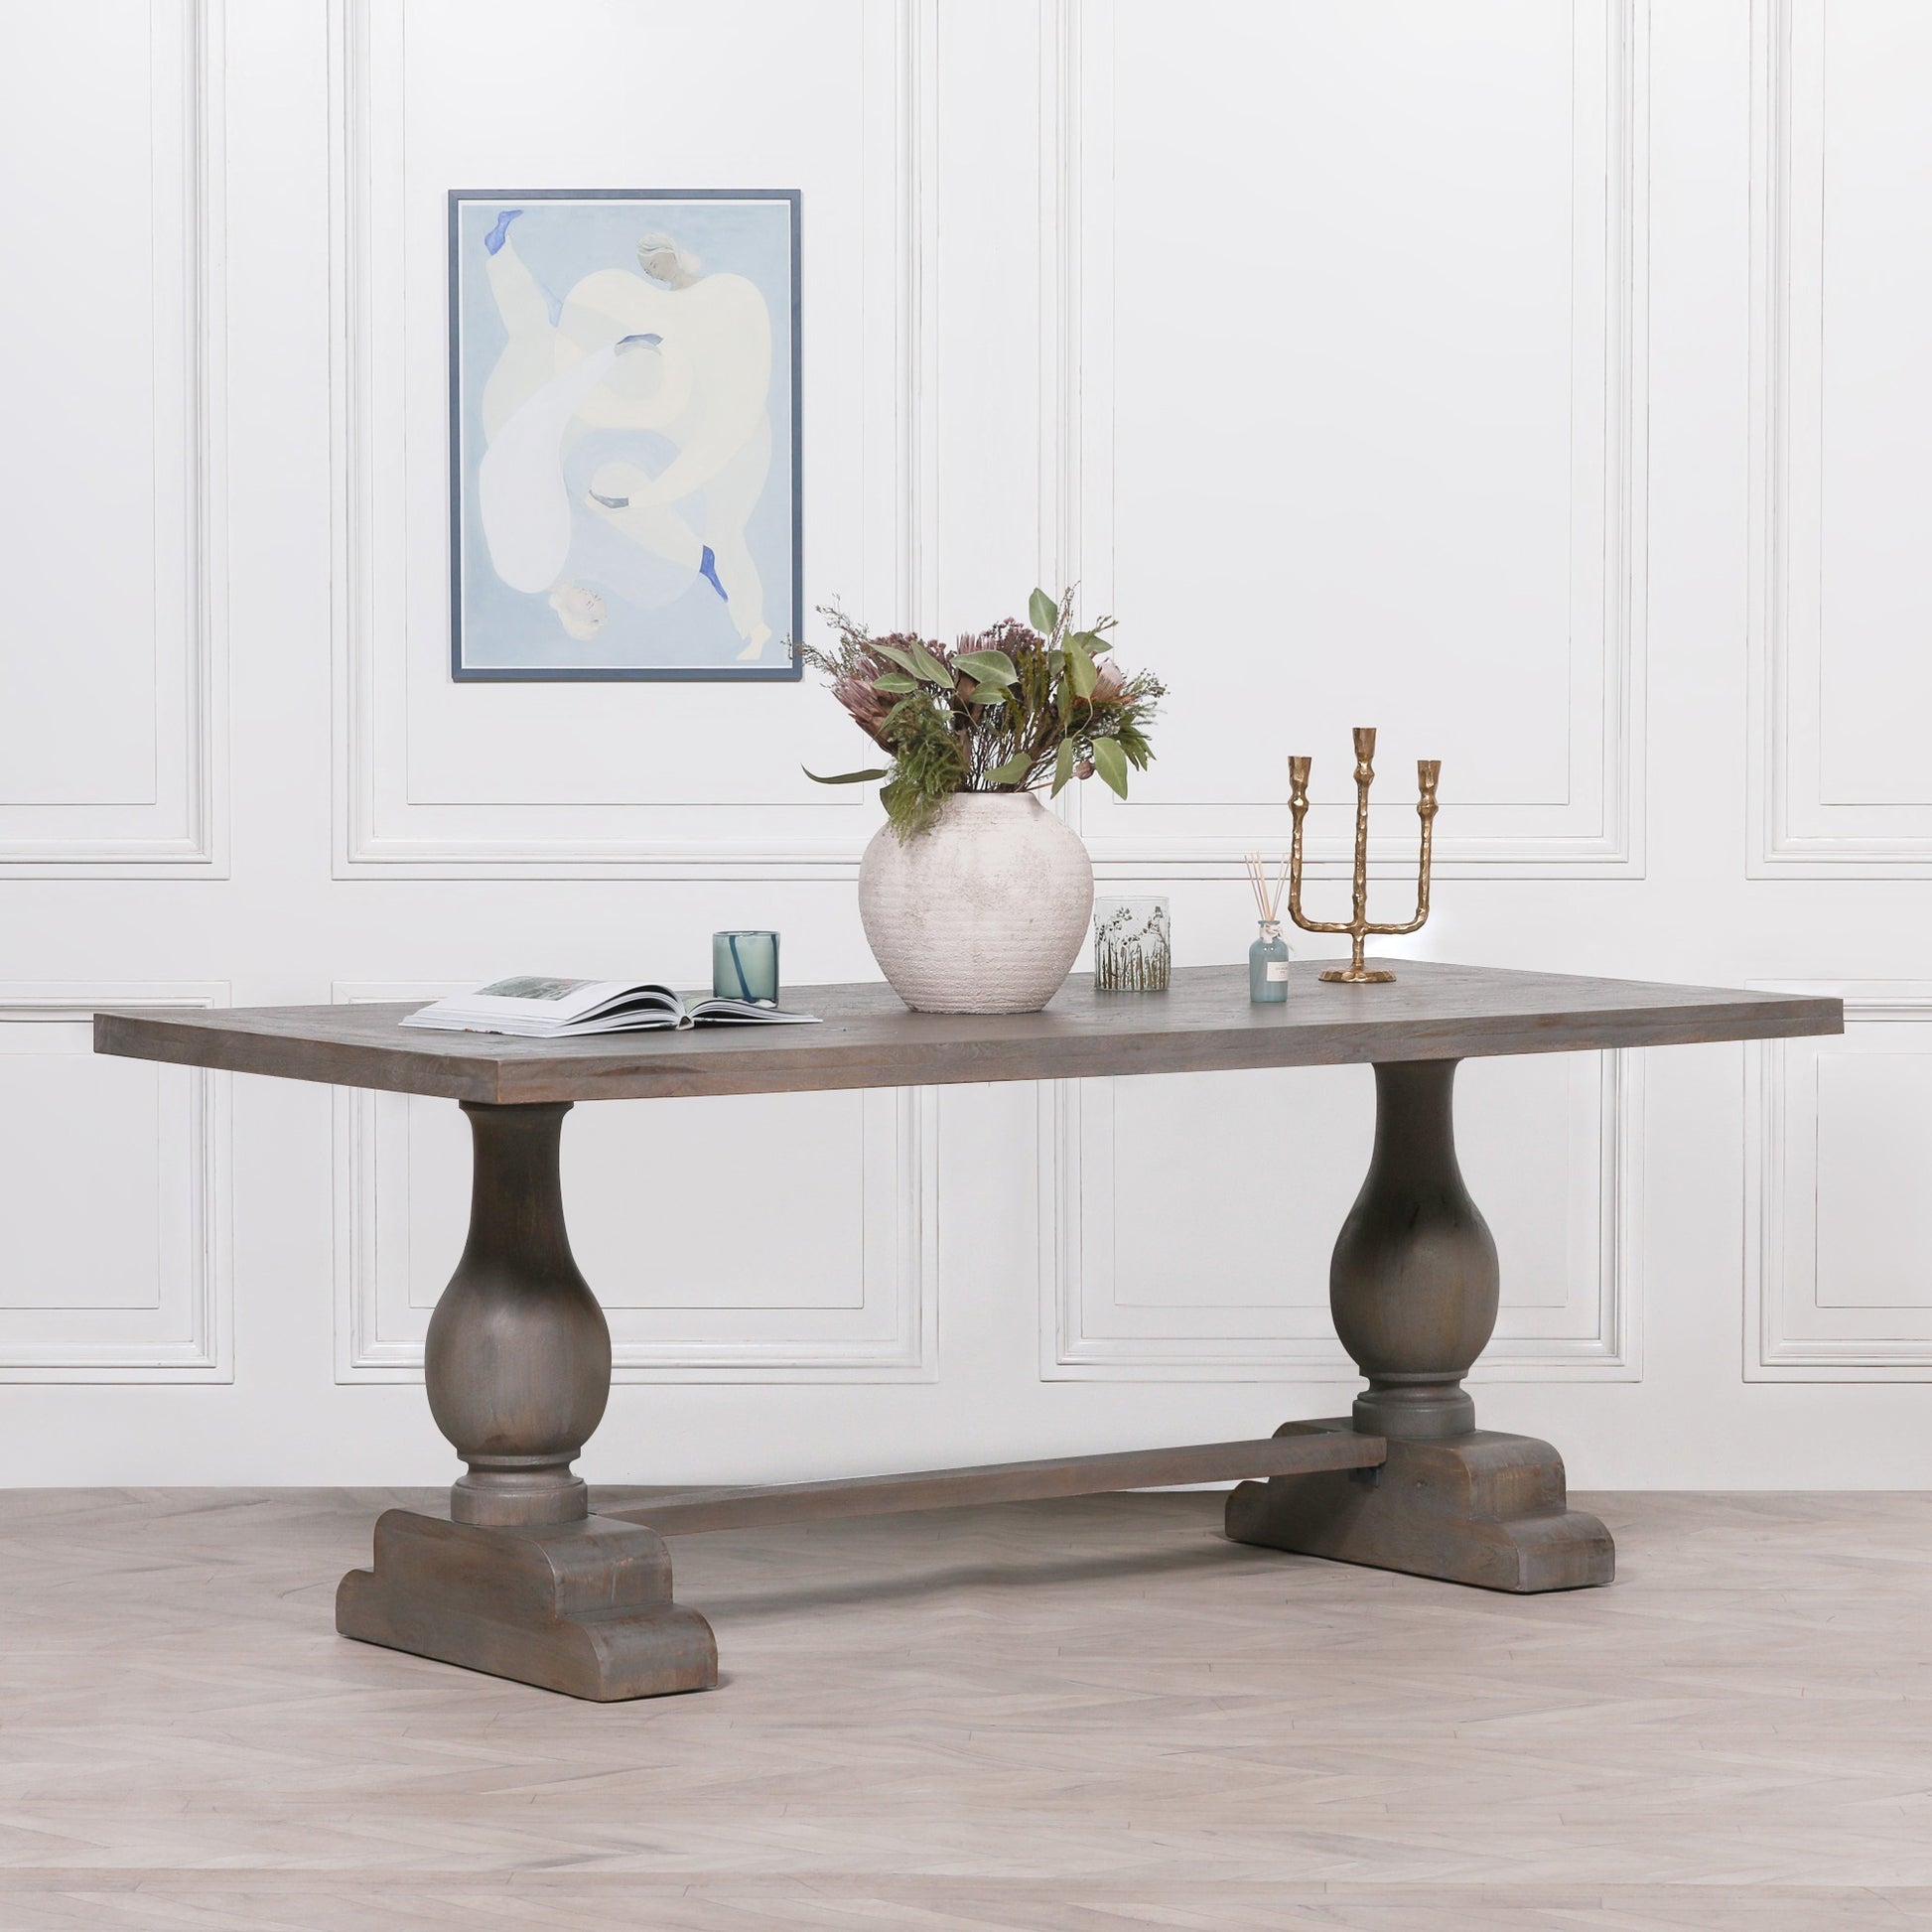 Wooden Rustic Rectangular Dining Table 210cm